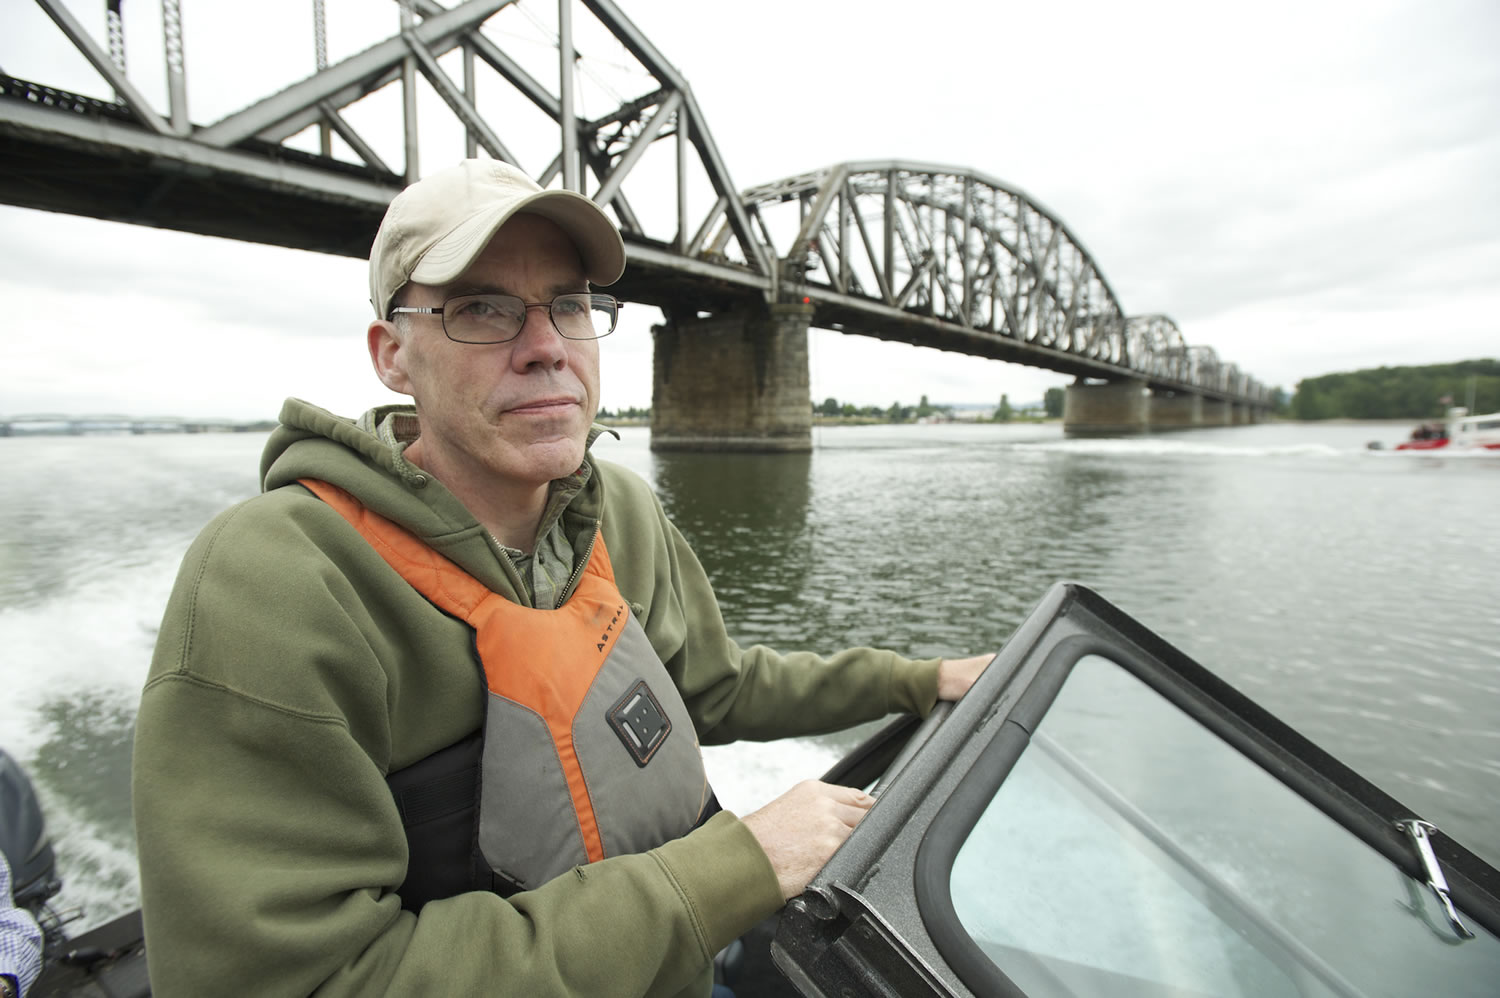 Environmental activist Bill McKibben passes under the Vancouver Railroad Bridge during a boat tour of  the Columbia River and the crude oil site proposed for the Port of Vancouver on Wednesday.